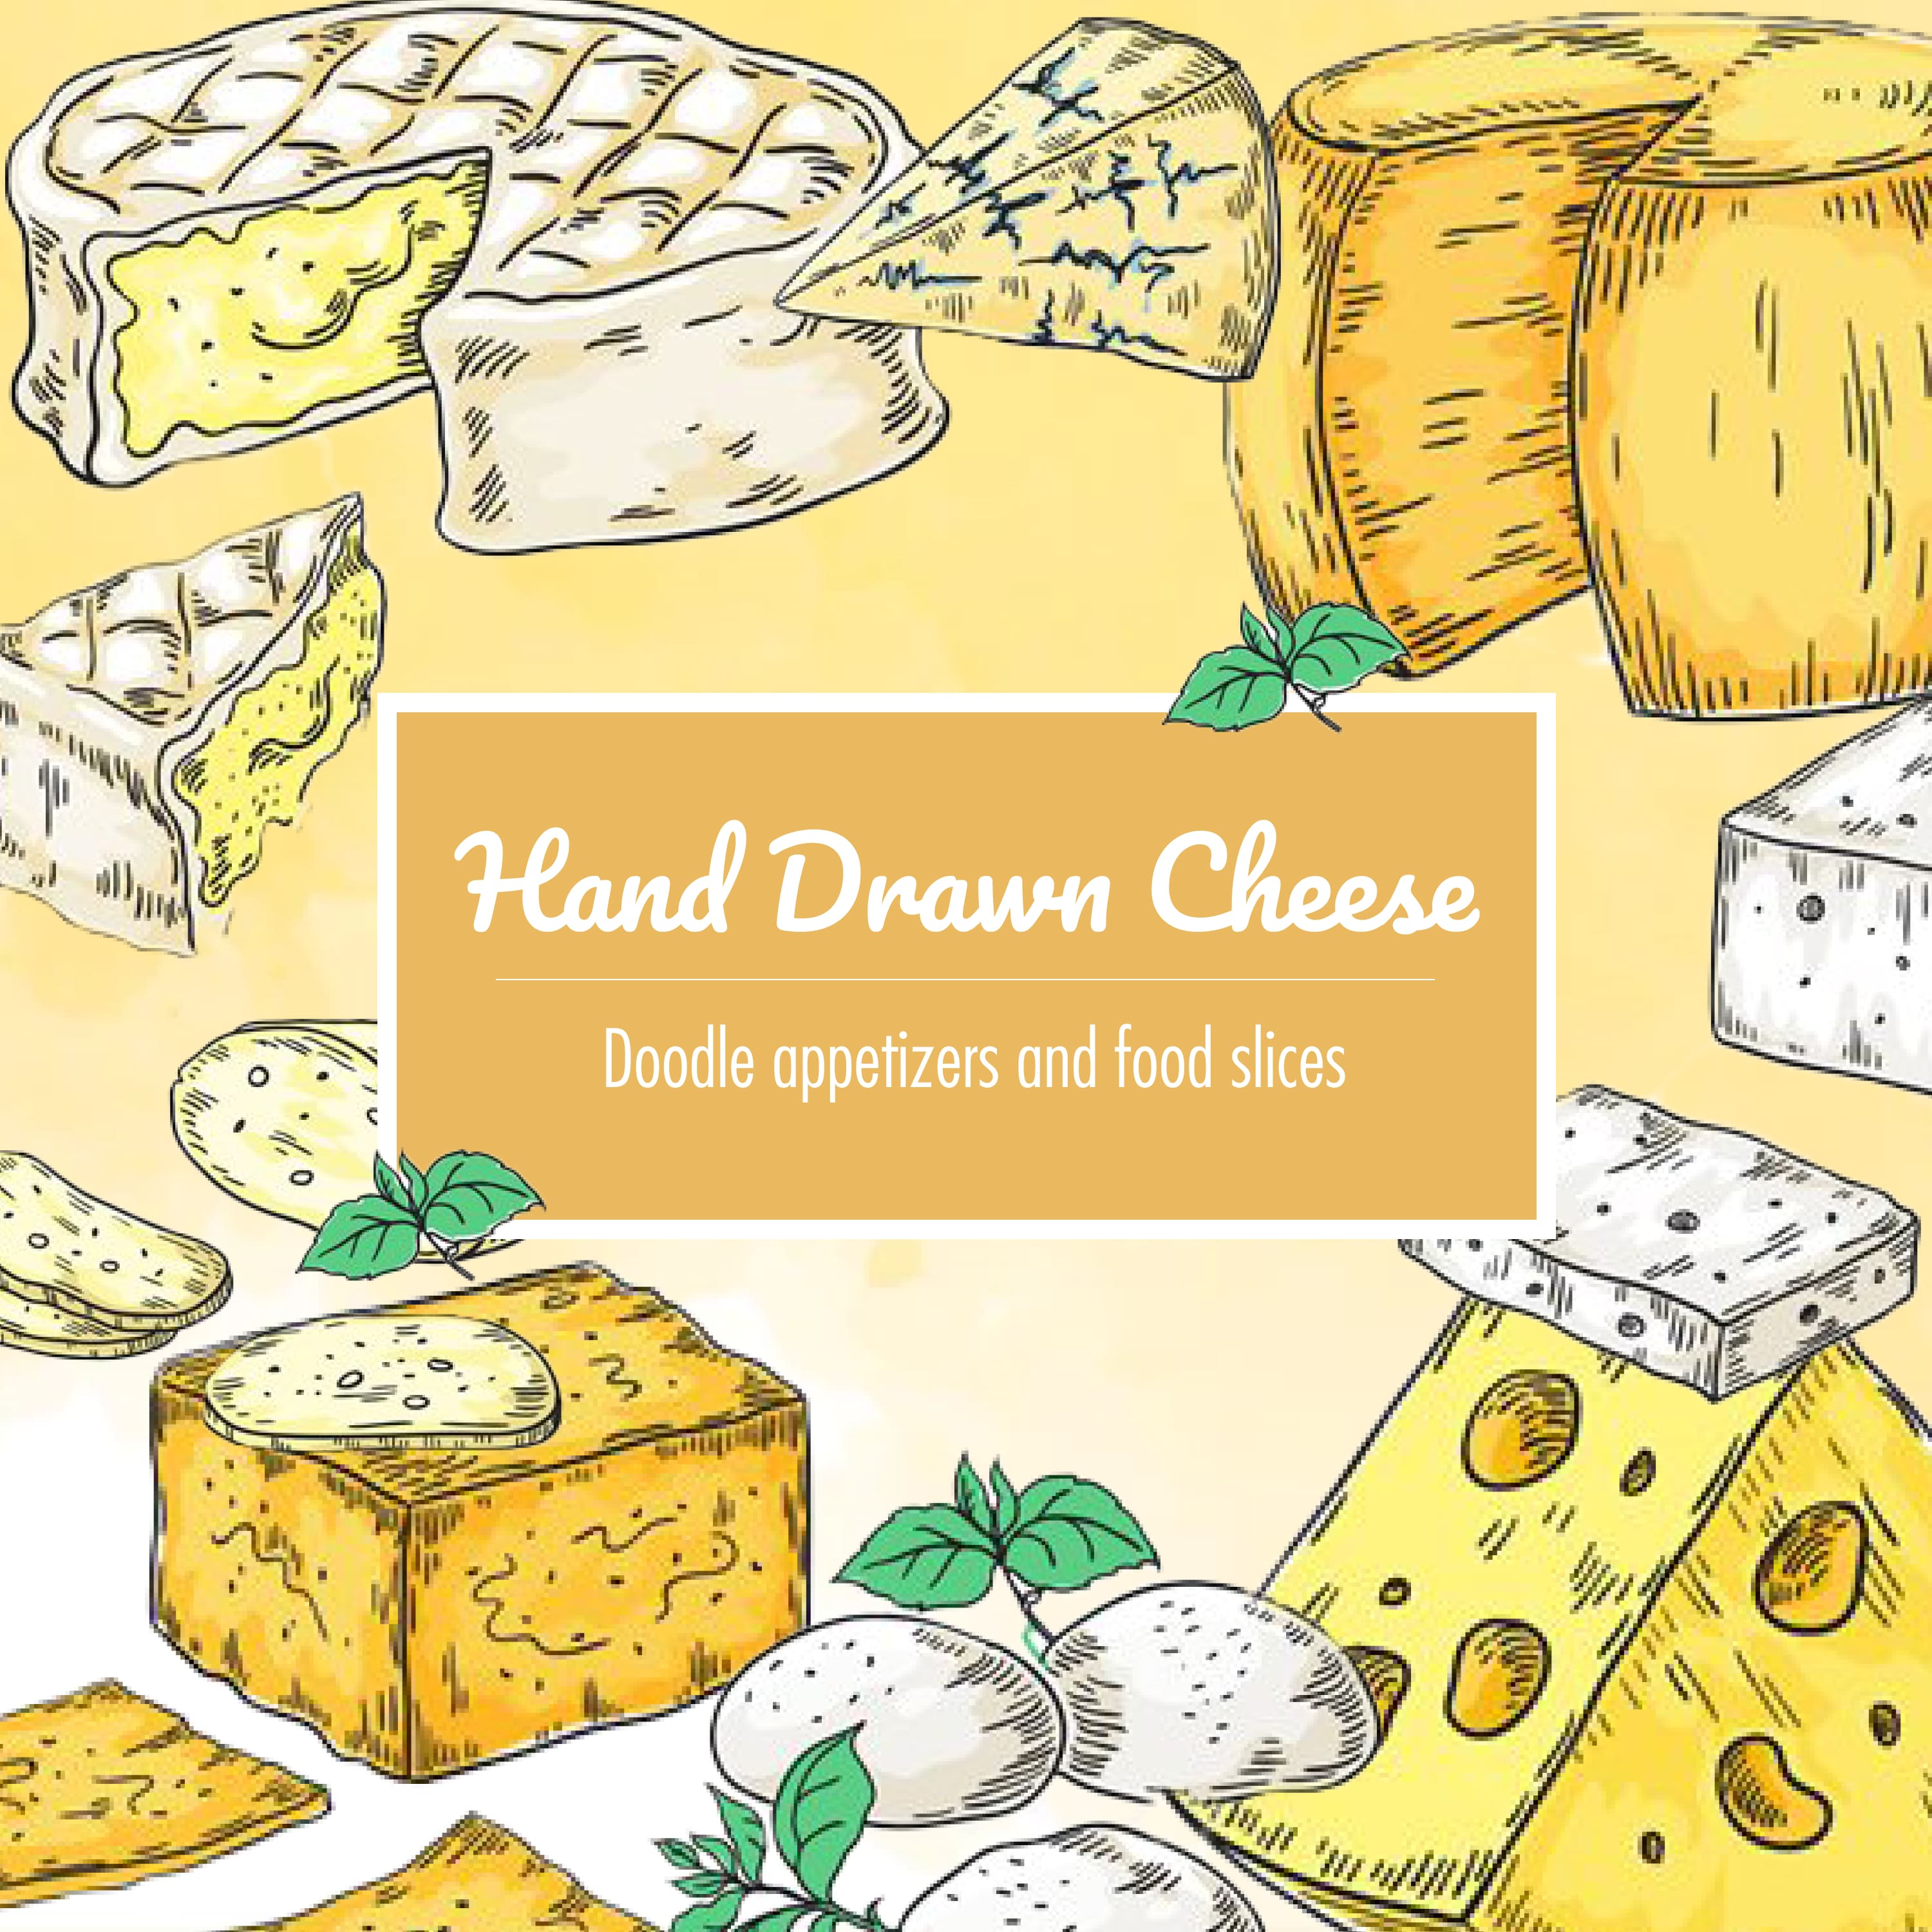 Cheese image hand-drawn on a bright background.